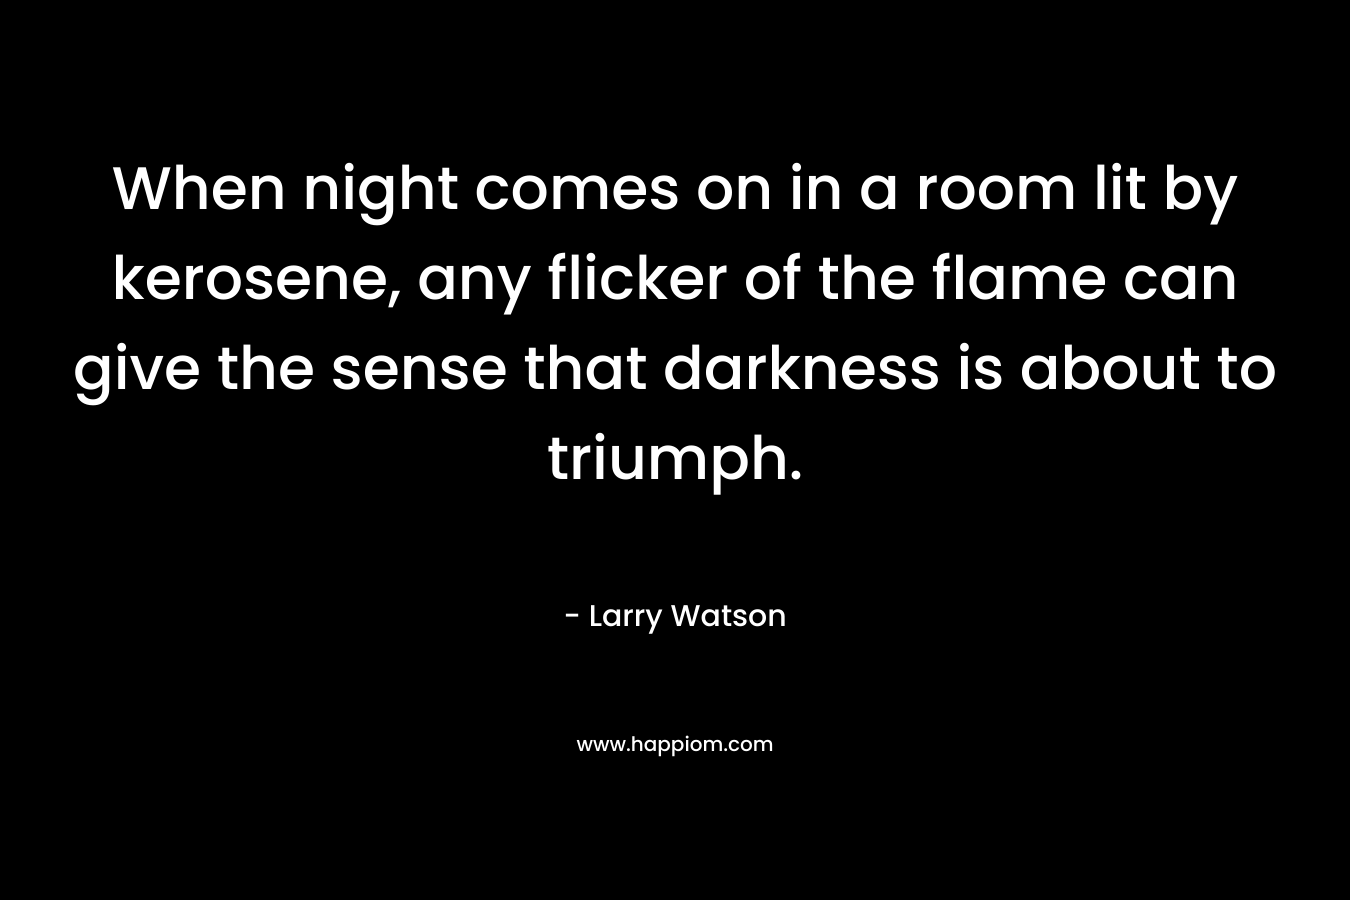 When night comes on in a room lit by kerosene, any flicker of the flame can give the sense that darkness is about to triumph. – Larry Watson